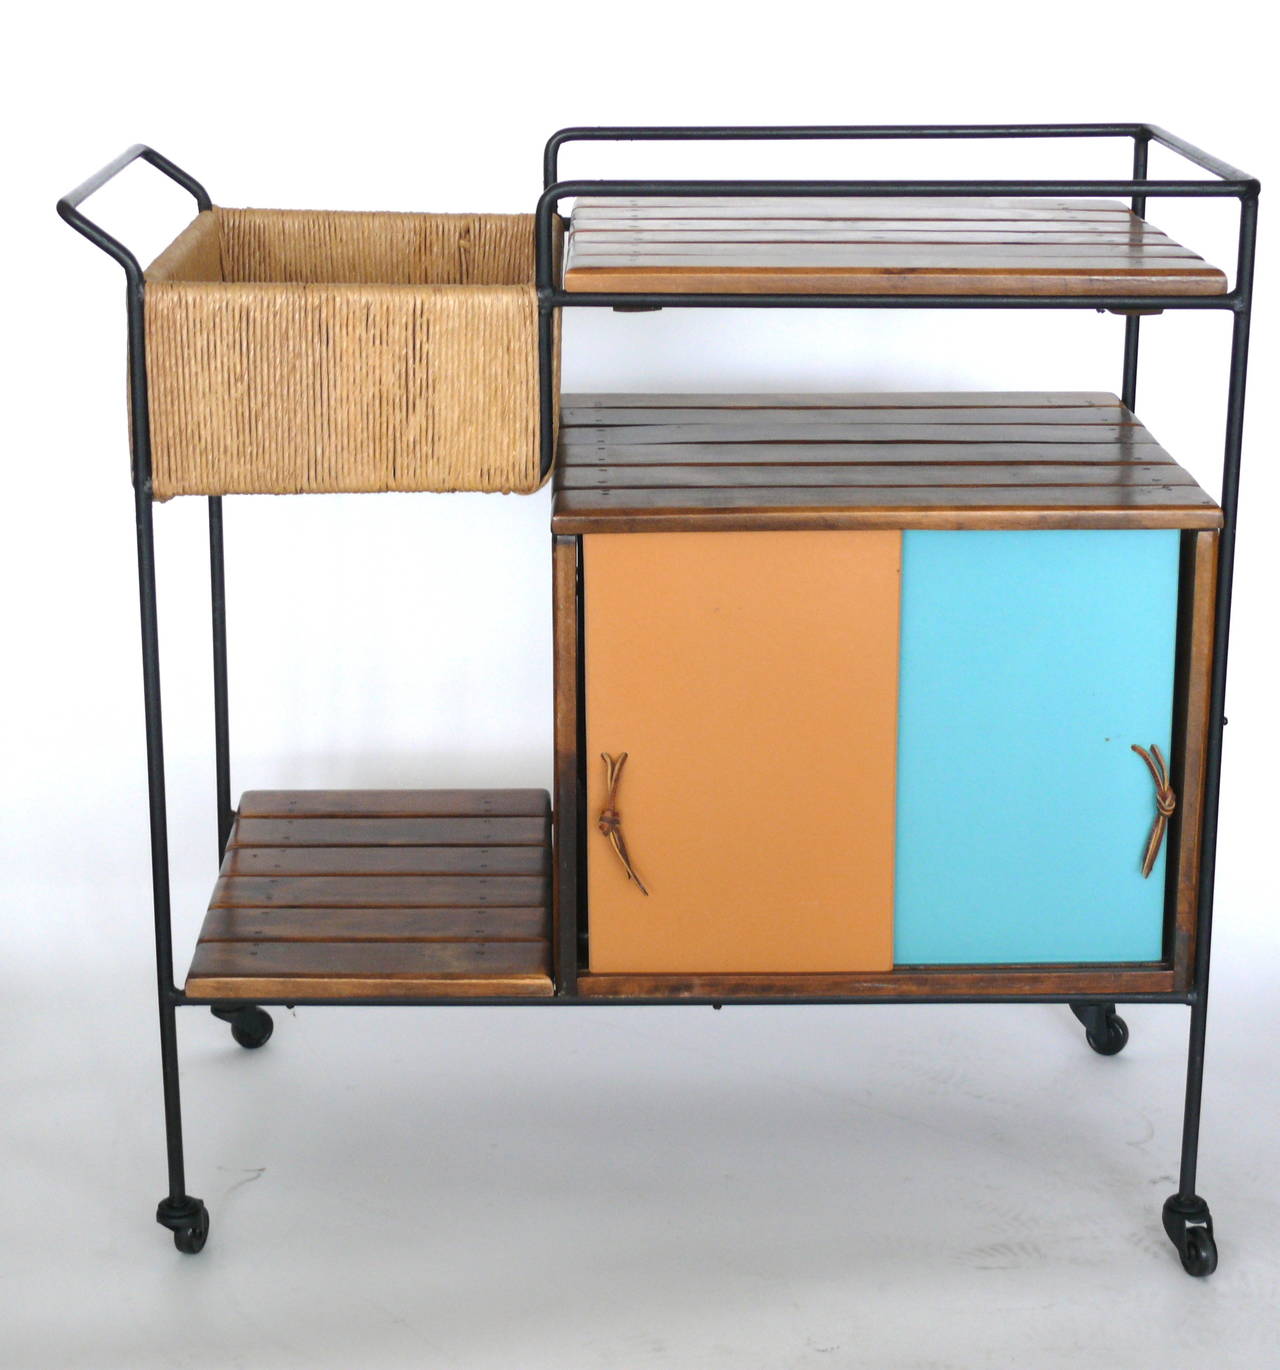 Whimsical bar cart by Arthur Umanoff on black casters. Iron framed cart features slatted wood, multiple shelves and an enclosed cabinet. Great colors and in excellent vintage condition.